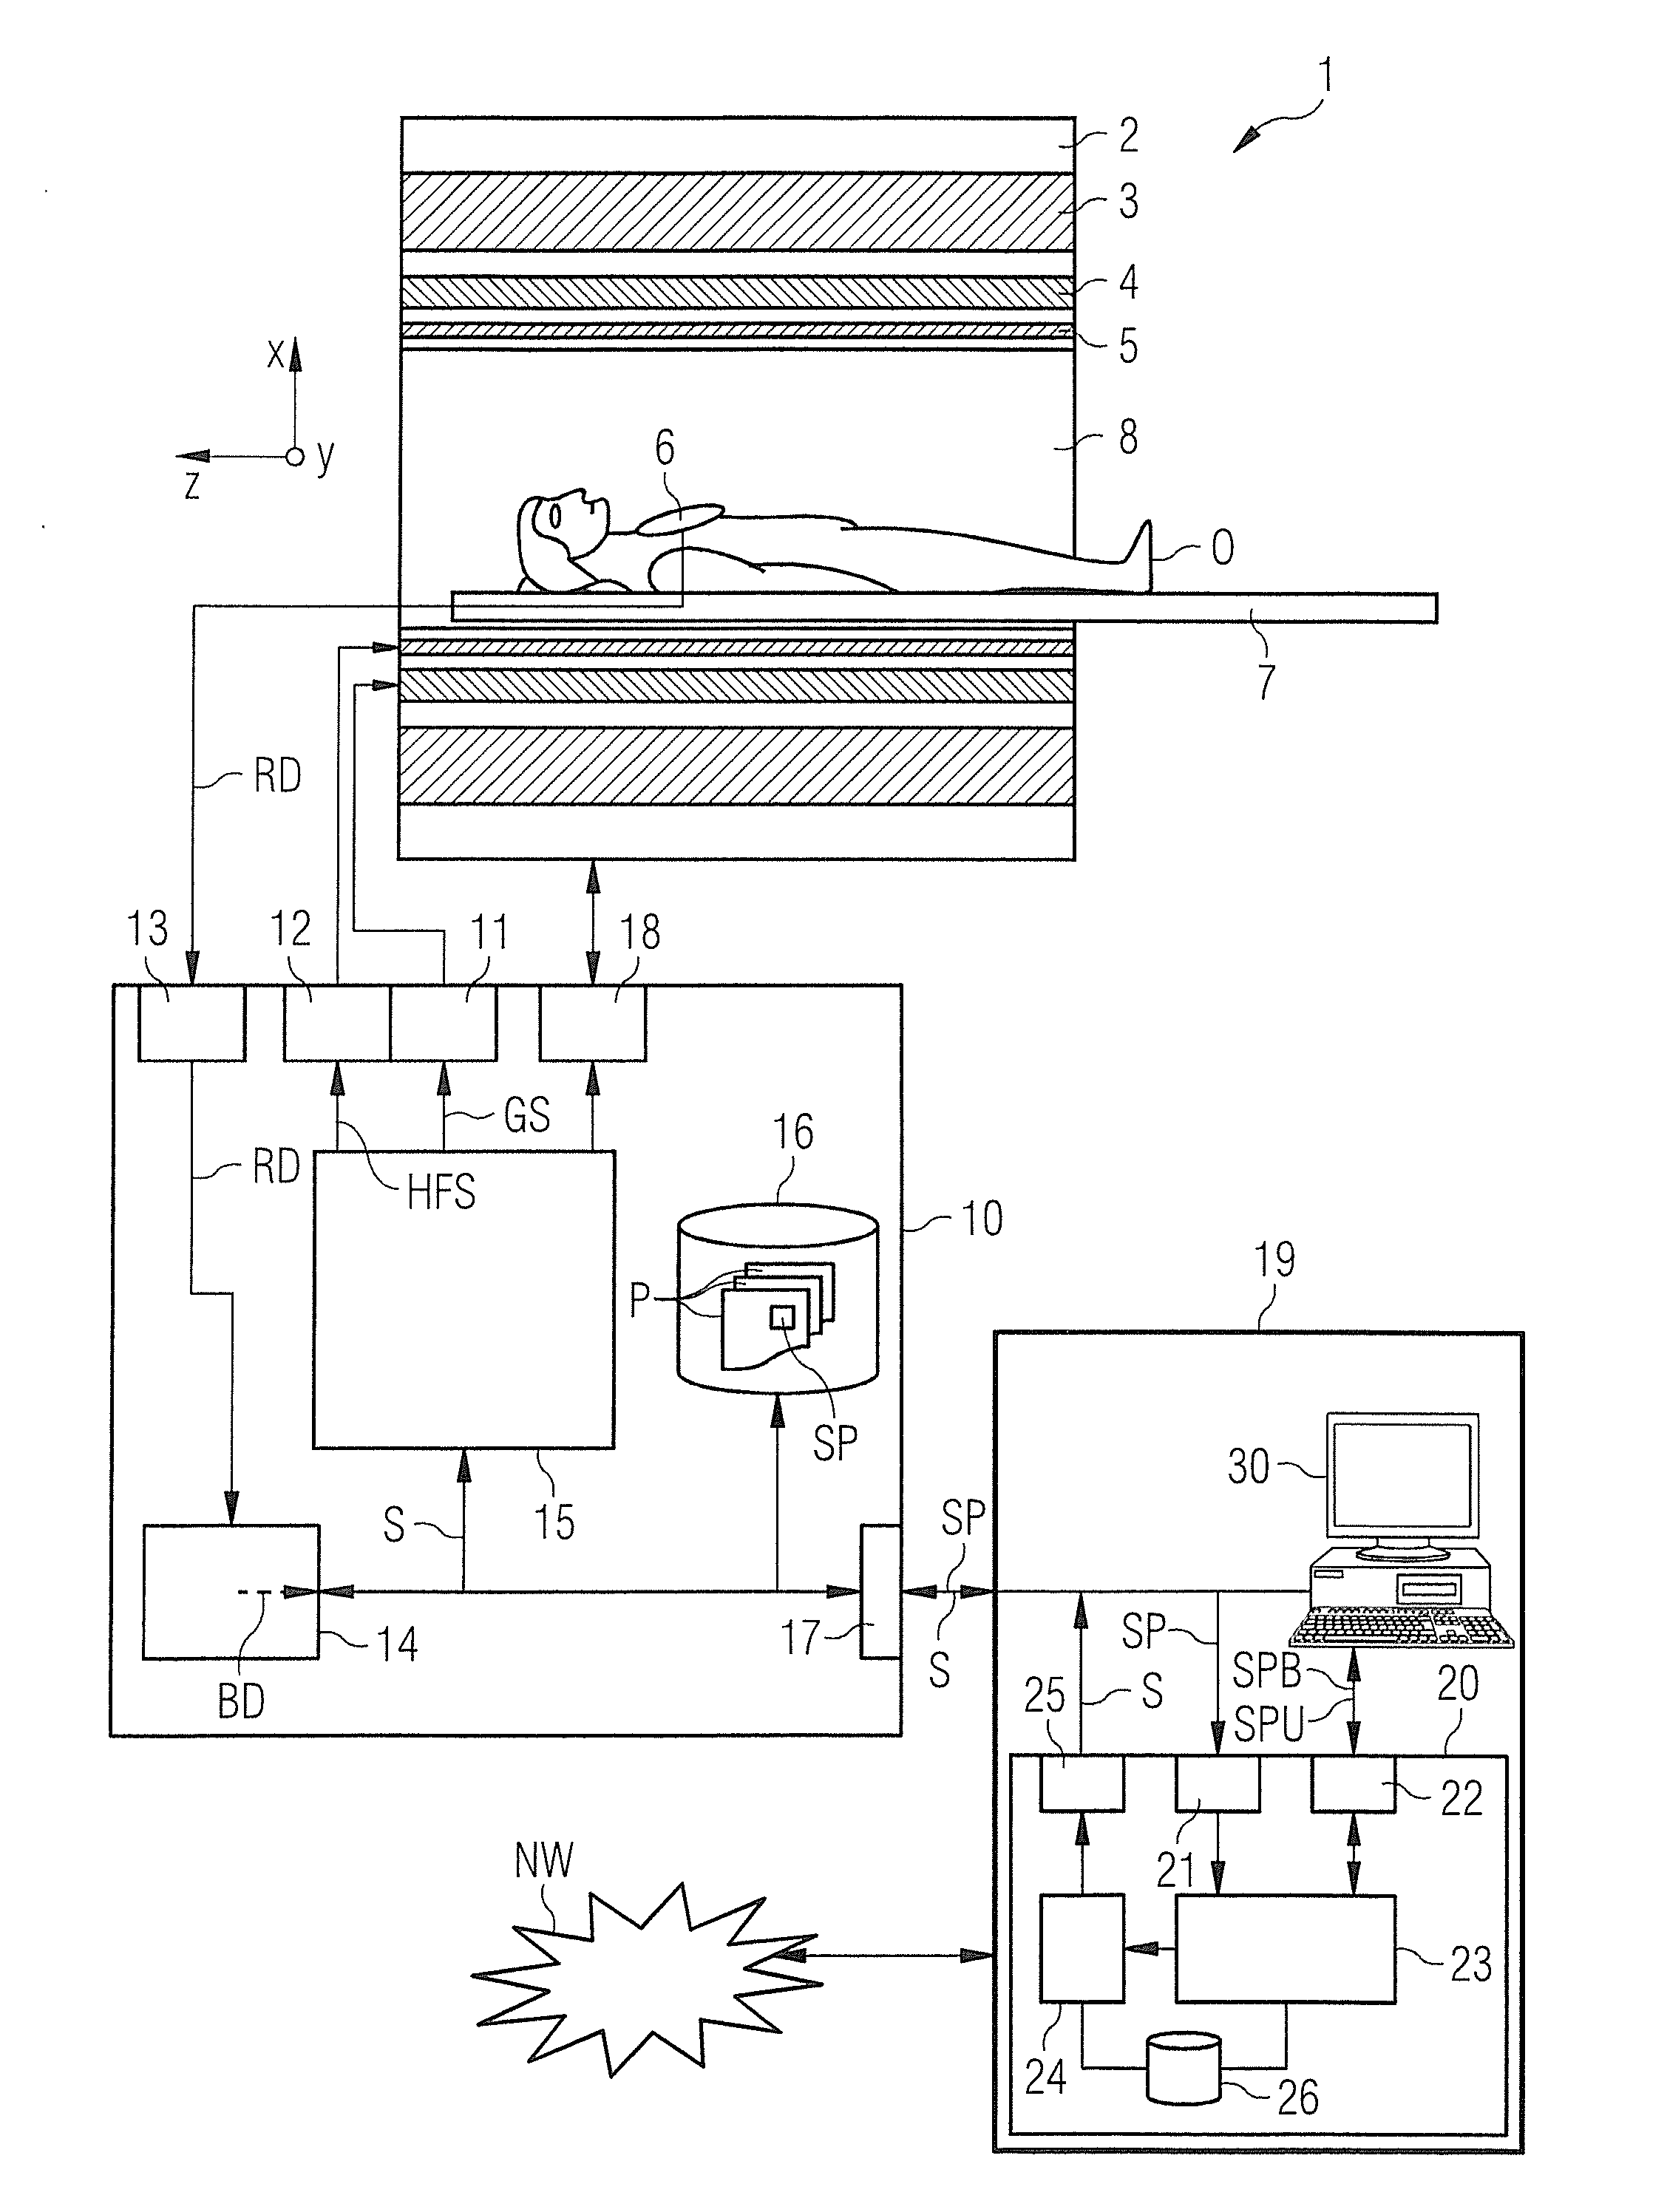 Determination of a pulse sequence for a magnetic resonance system